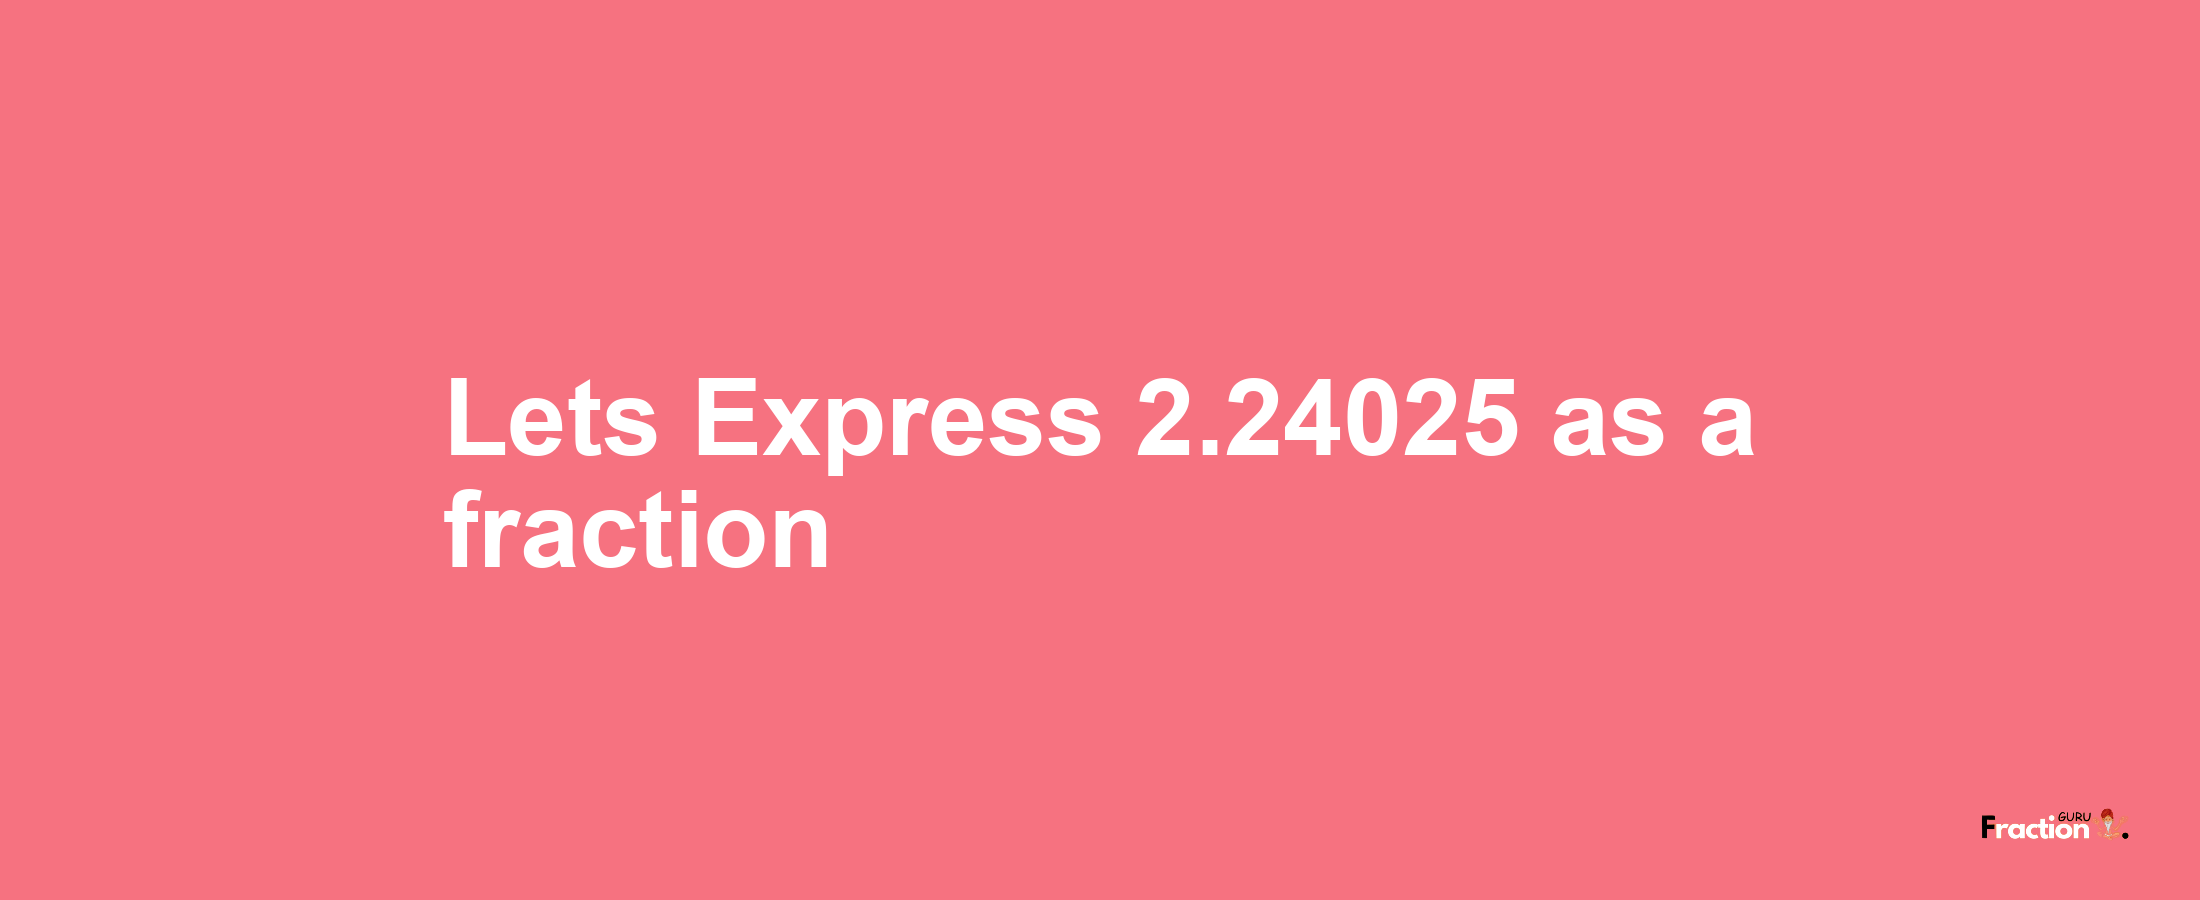 Lets Express 2.24025 as afraction